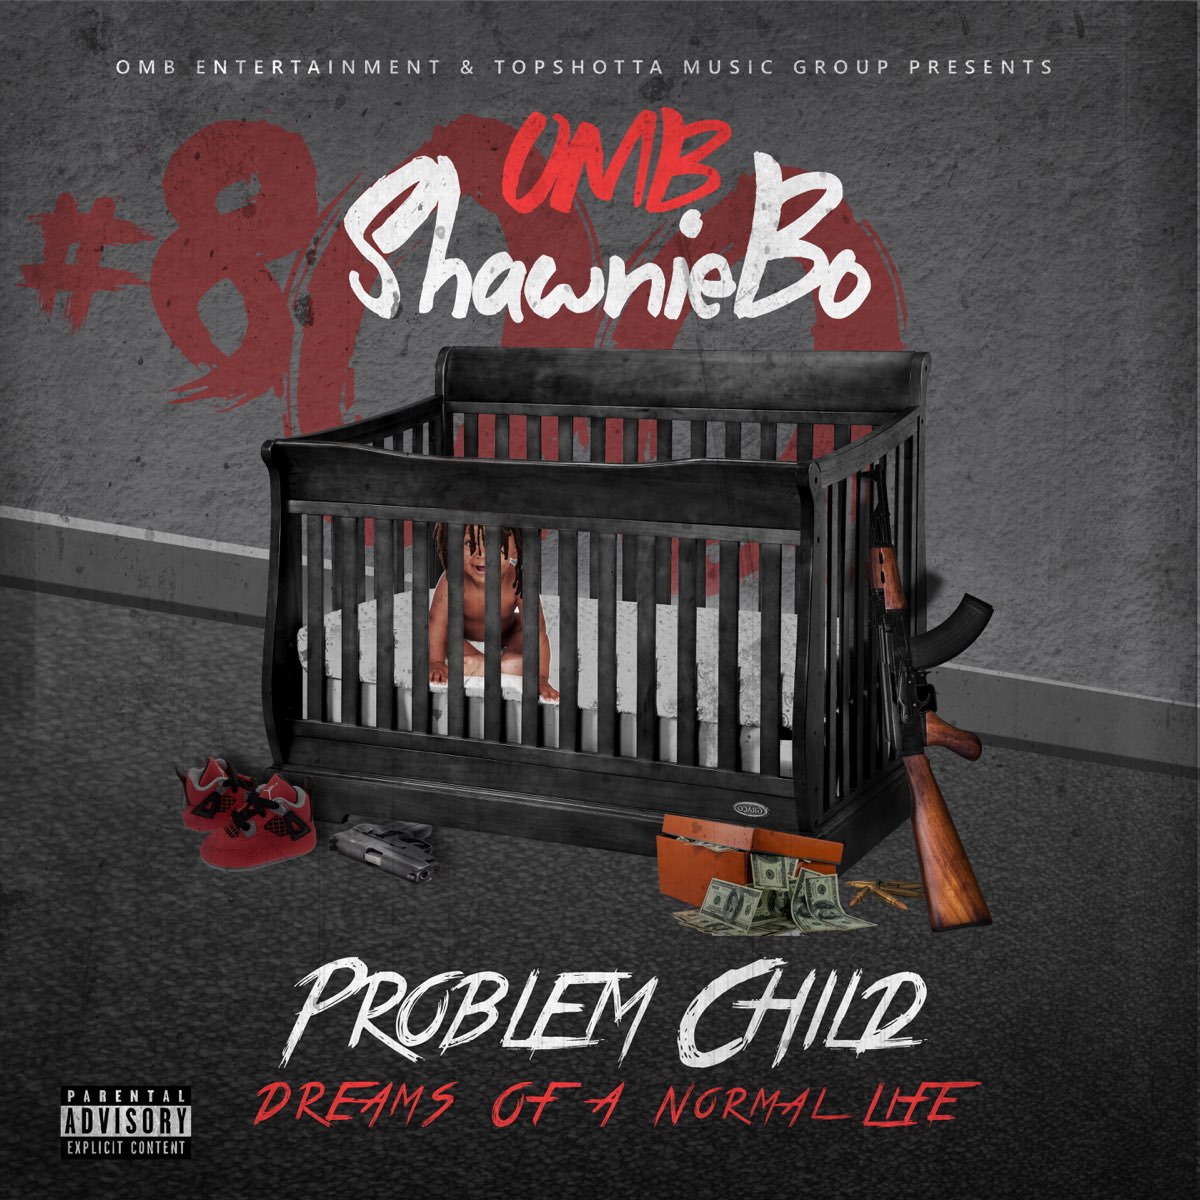 OMB Shawniebo - Problem Child Dreams Of A Normal Life